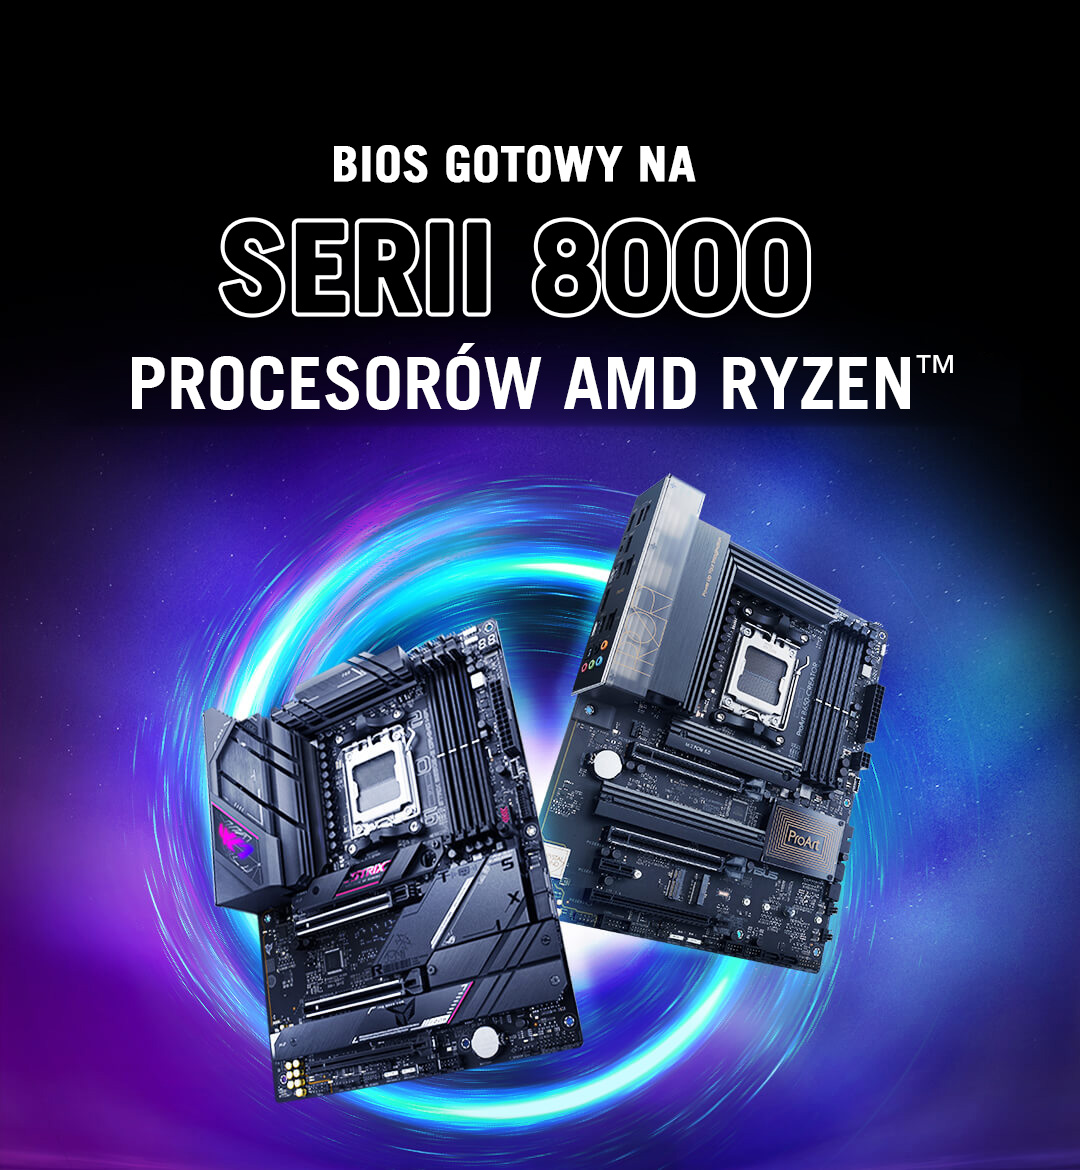 Two B650 motherboards image with BIOS Ready for 8000 Series AMD Ryzen™ Processors